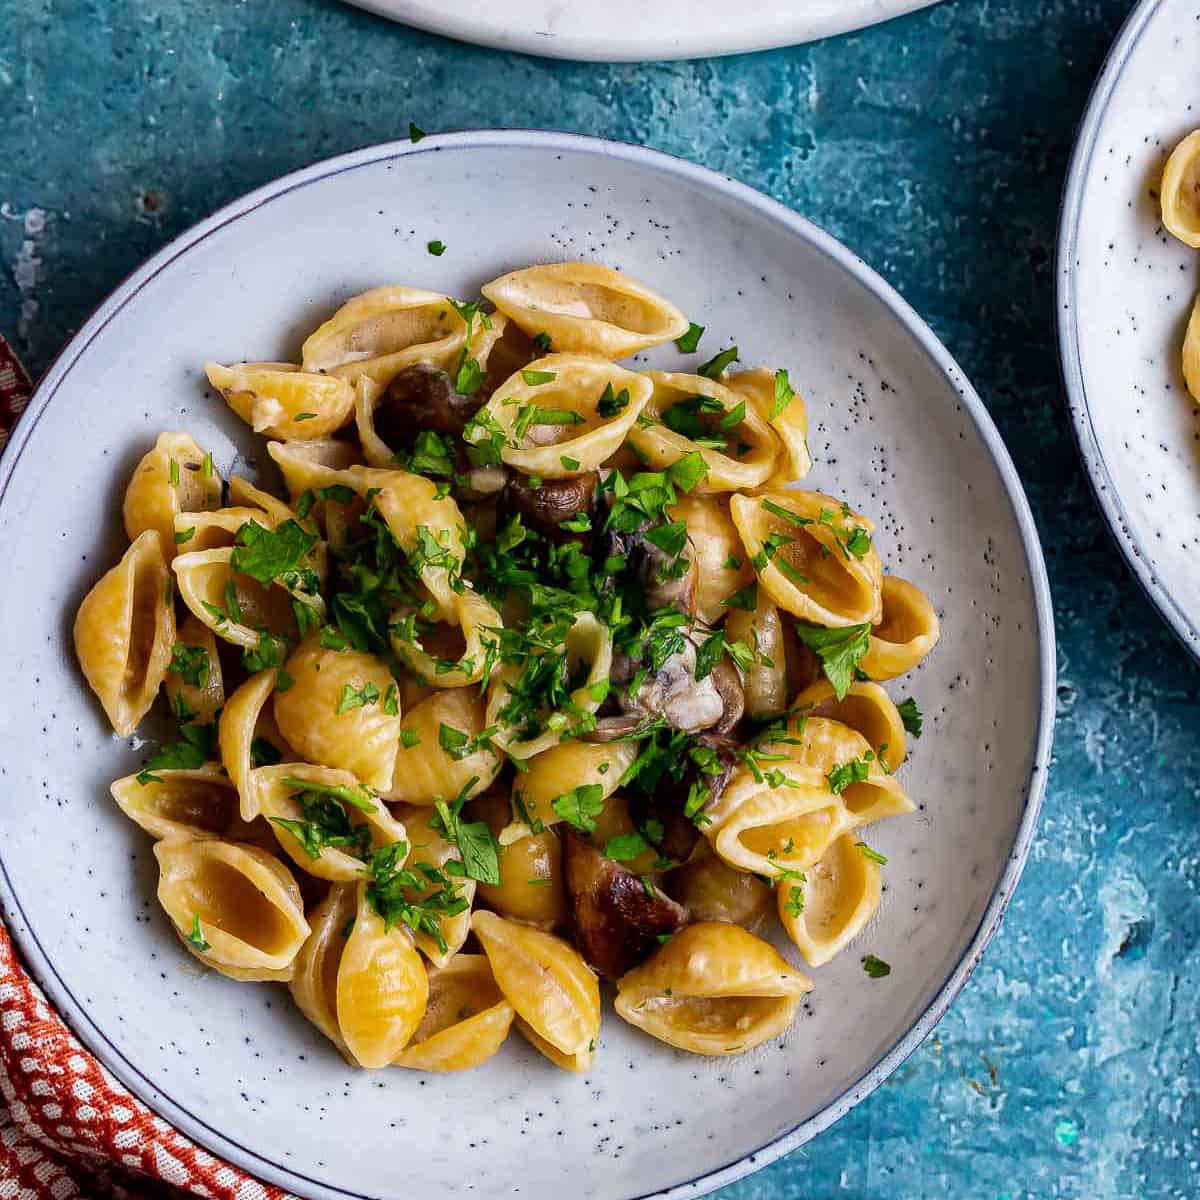 Miso Pasta with Mushrooms • The Cook Report